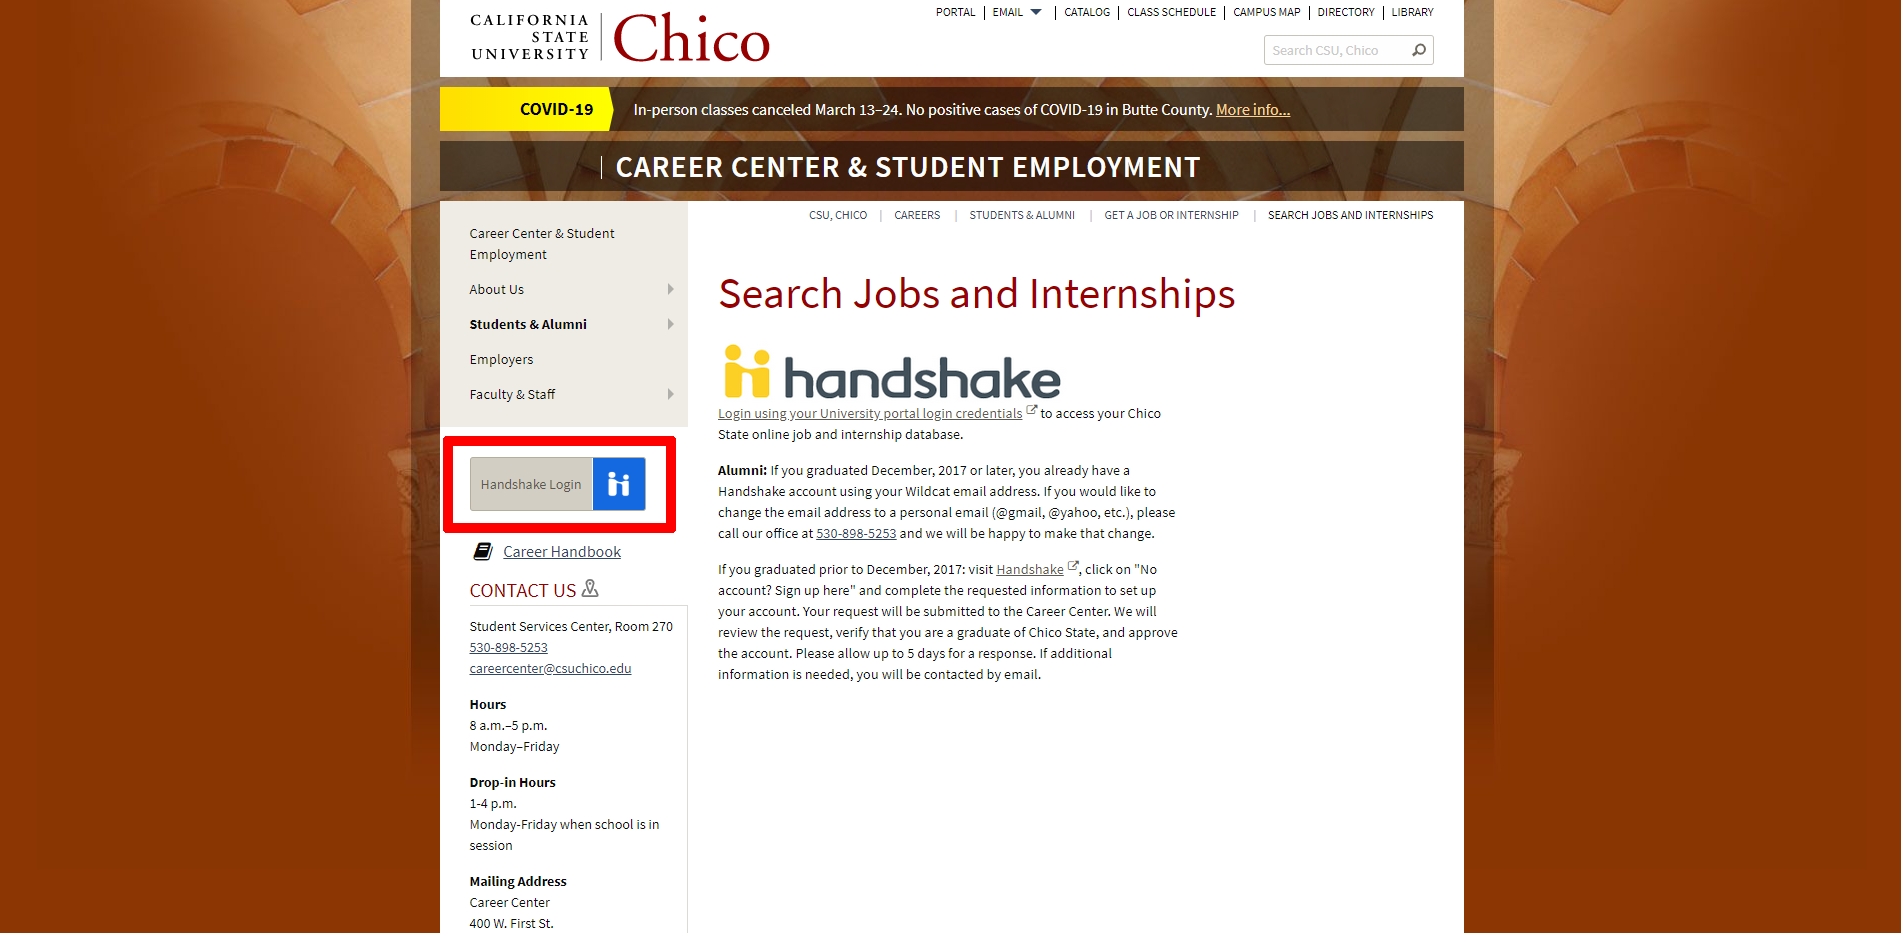 Handshake Description Page from Chico State